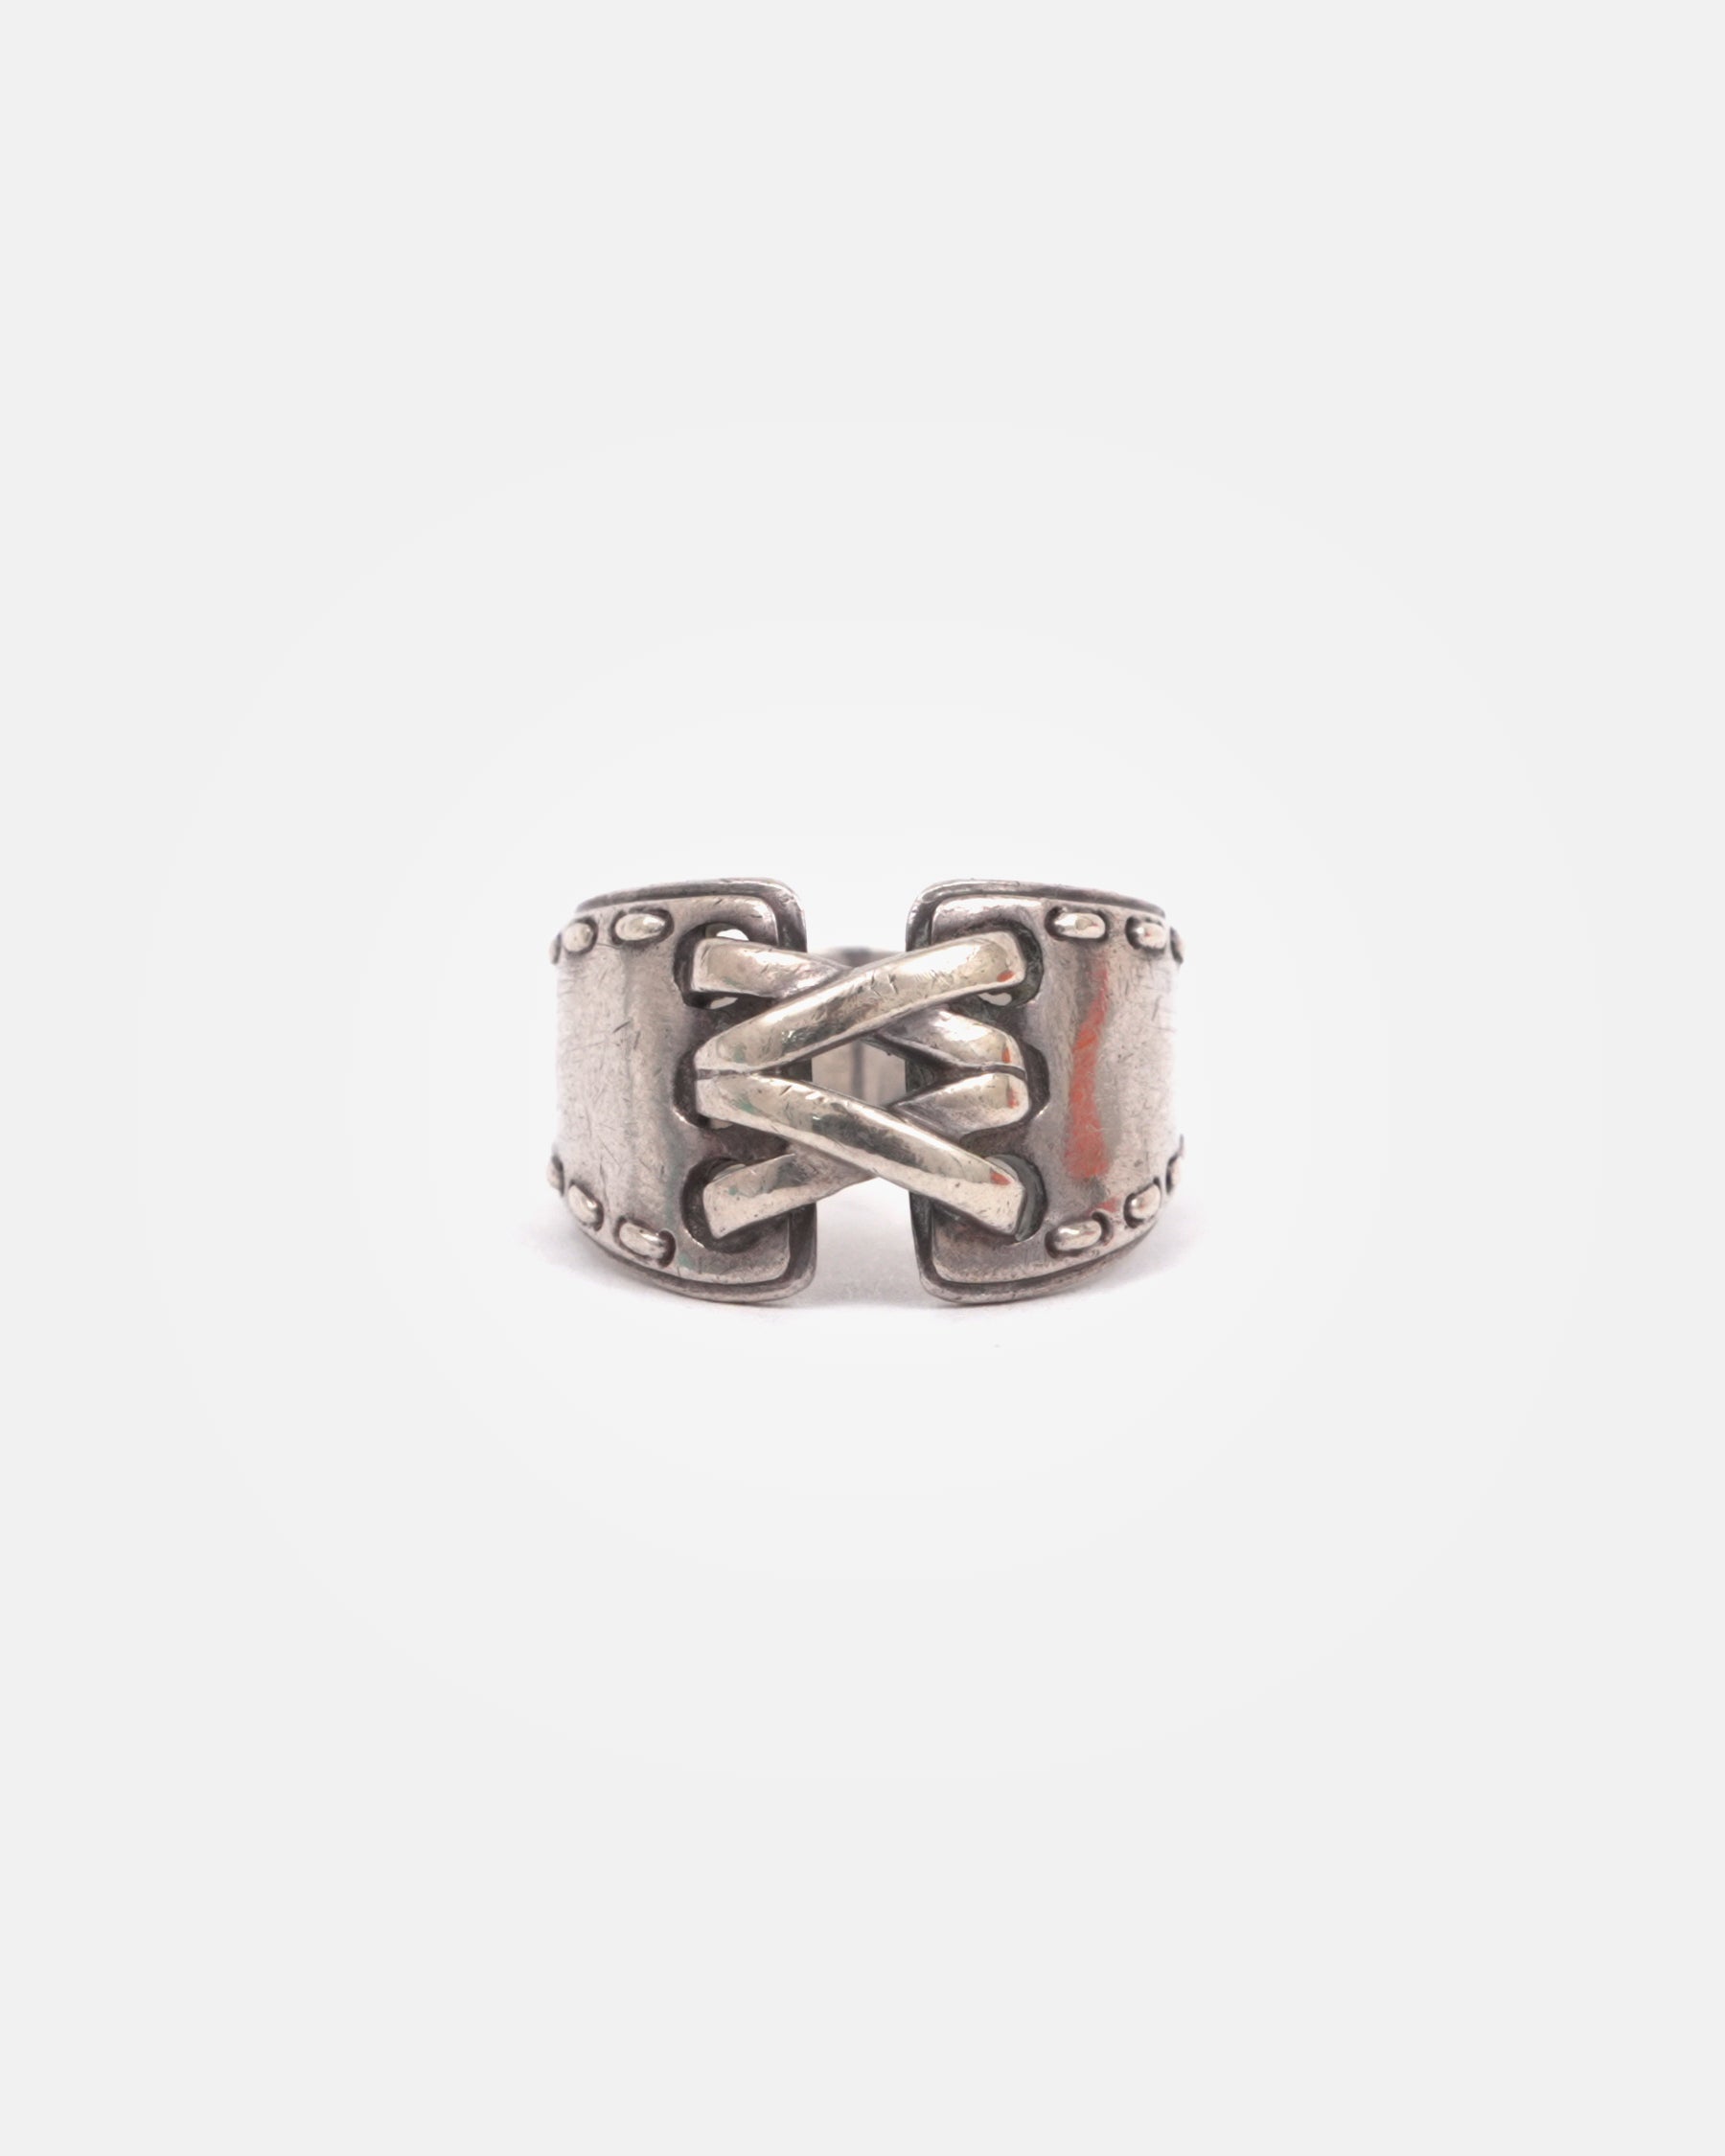 HERMES Silver Ring: Size8.5